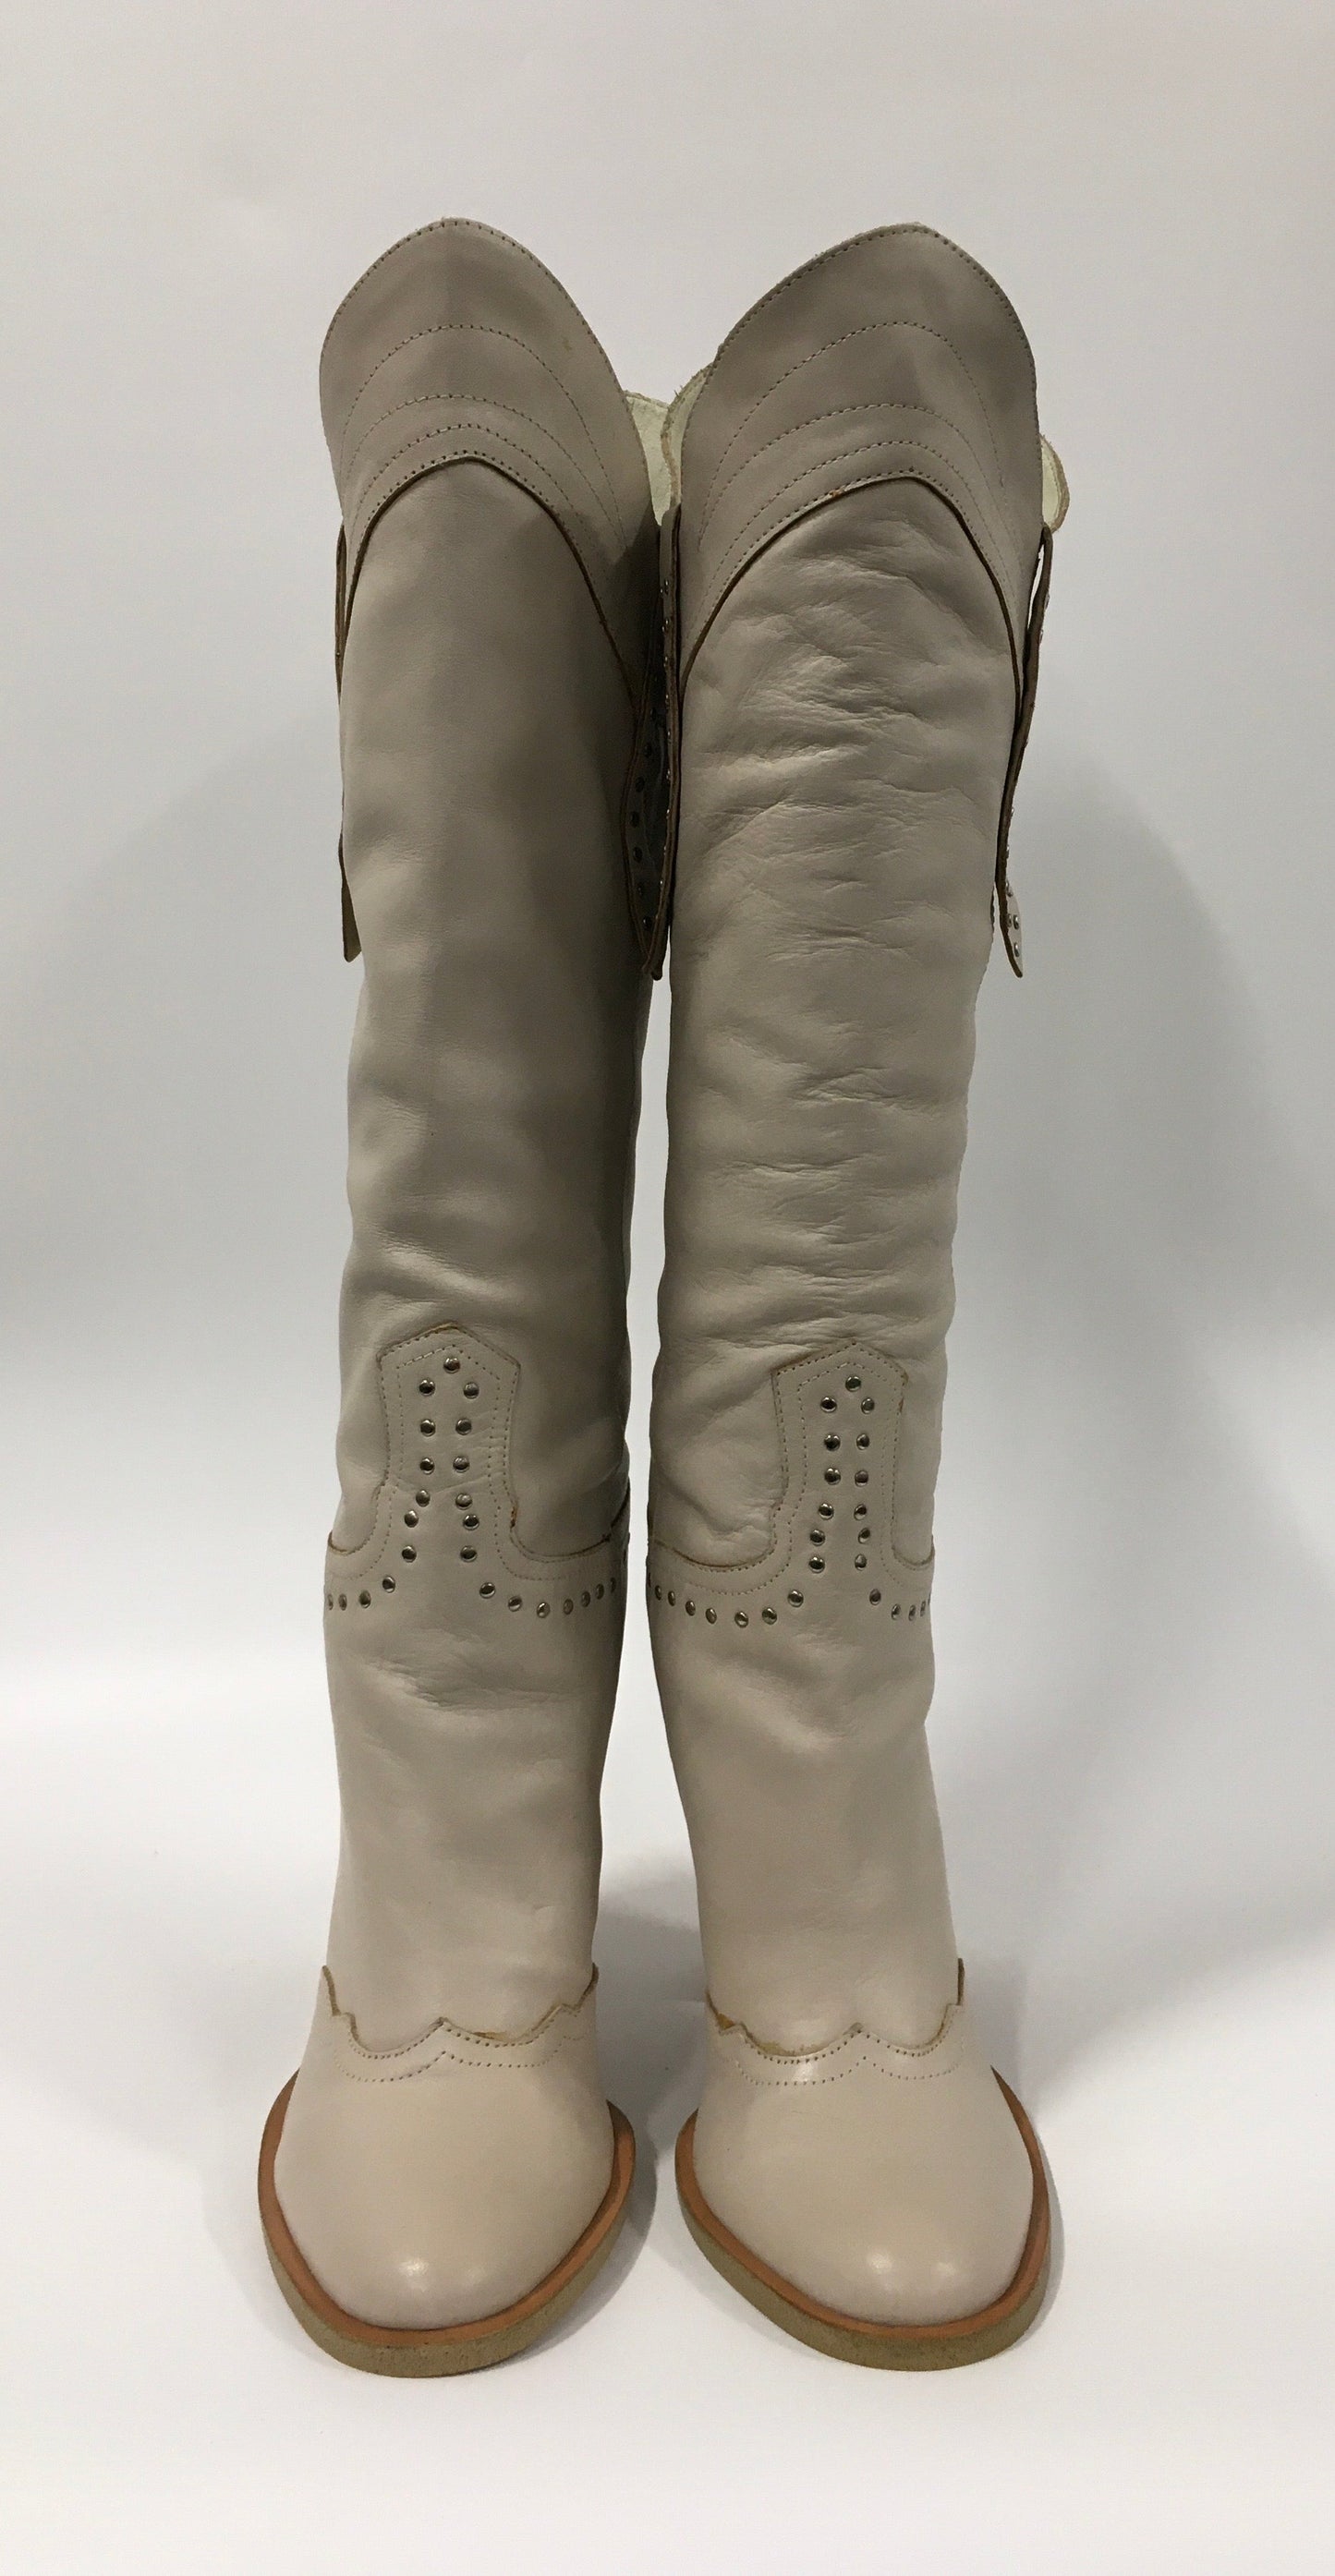 Boots Western By Steve Madden  Size: 8.5